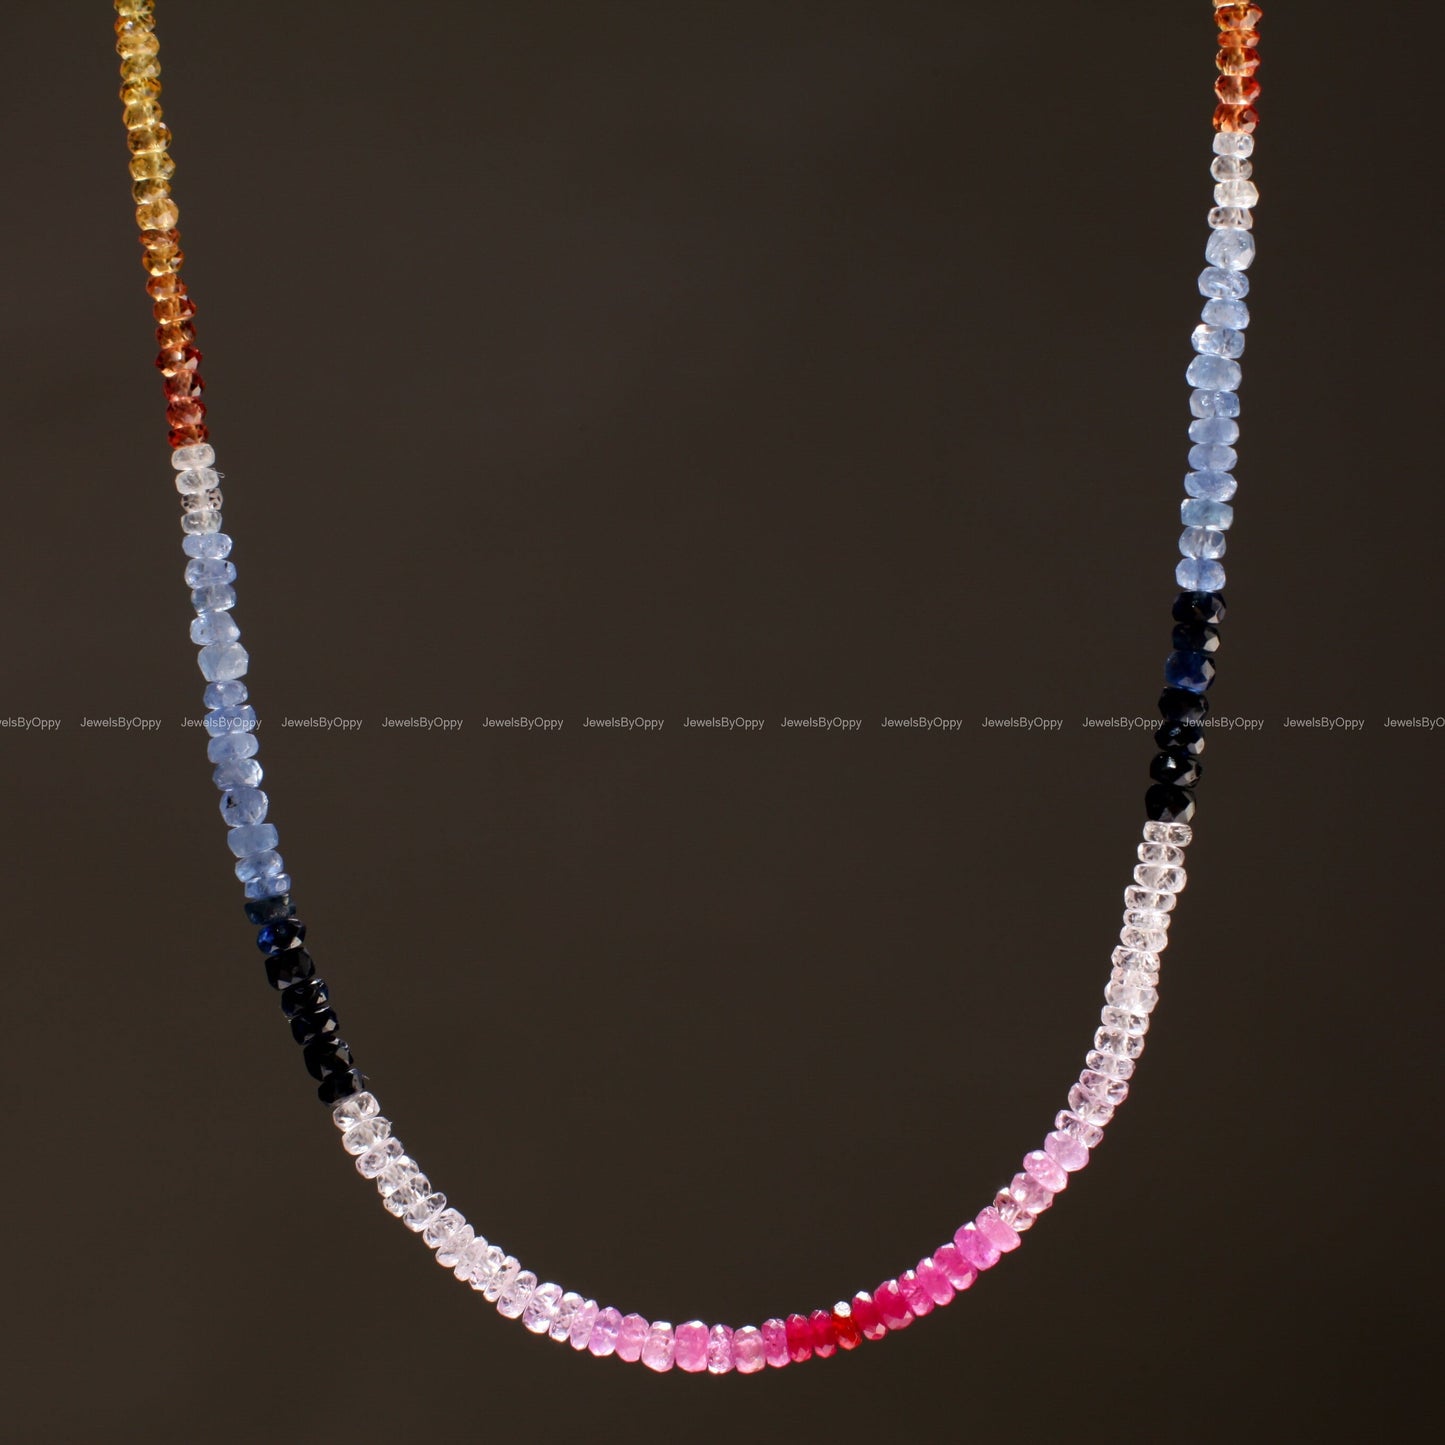 Multi Sapphire 3-3.5mm micro faceted Rondelle Necklace in 925 Sterling Silver, AAA quality Natural gems, September Birthstone precious Gift.